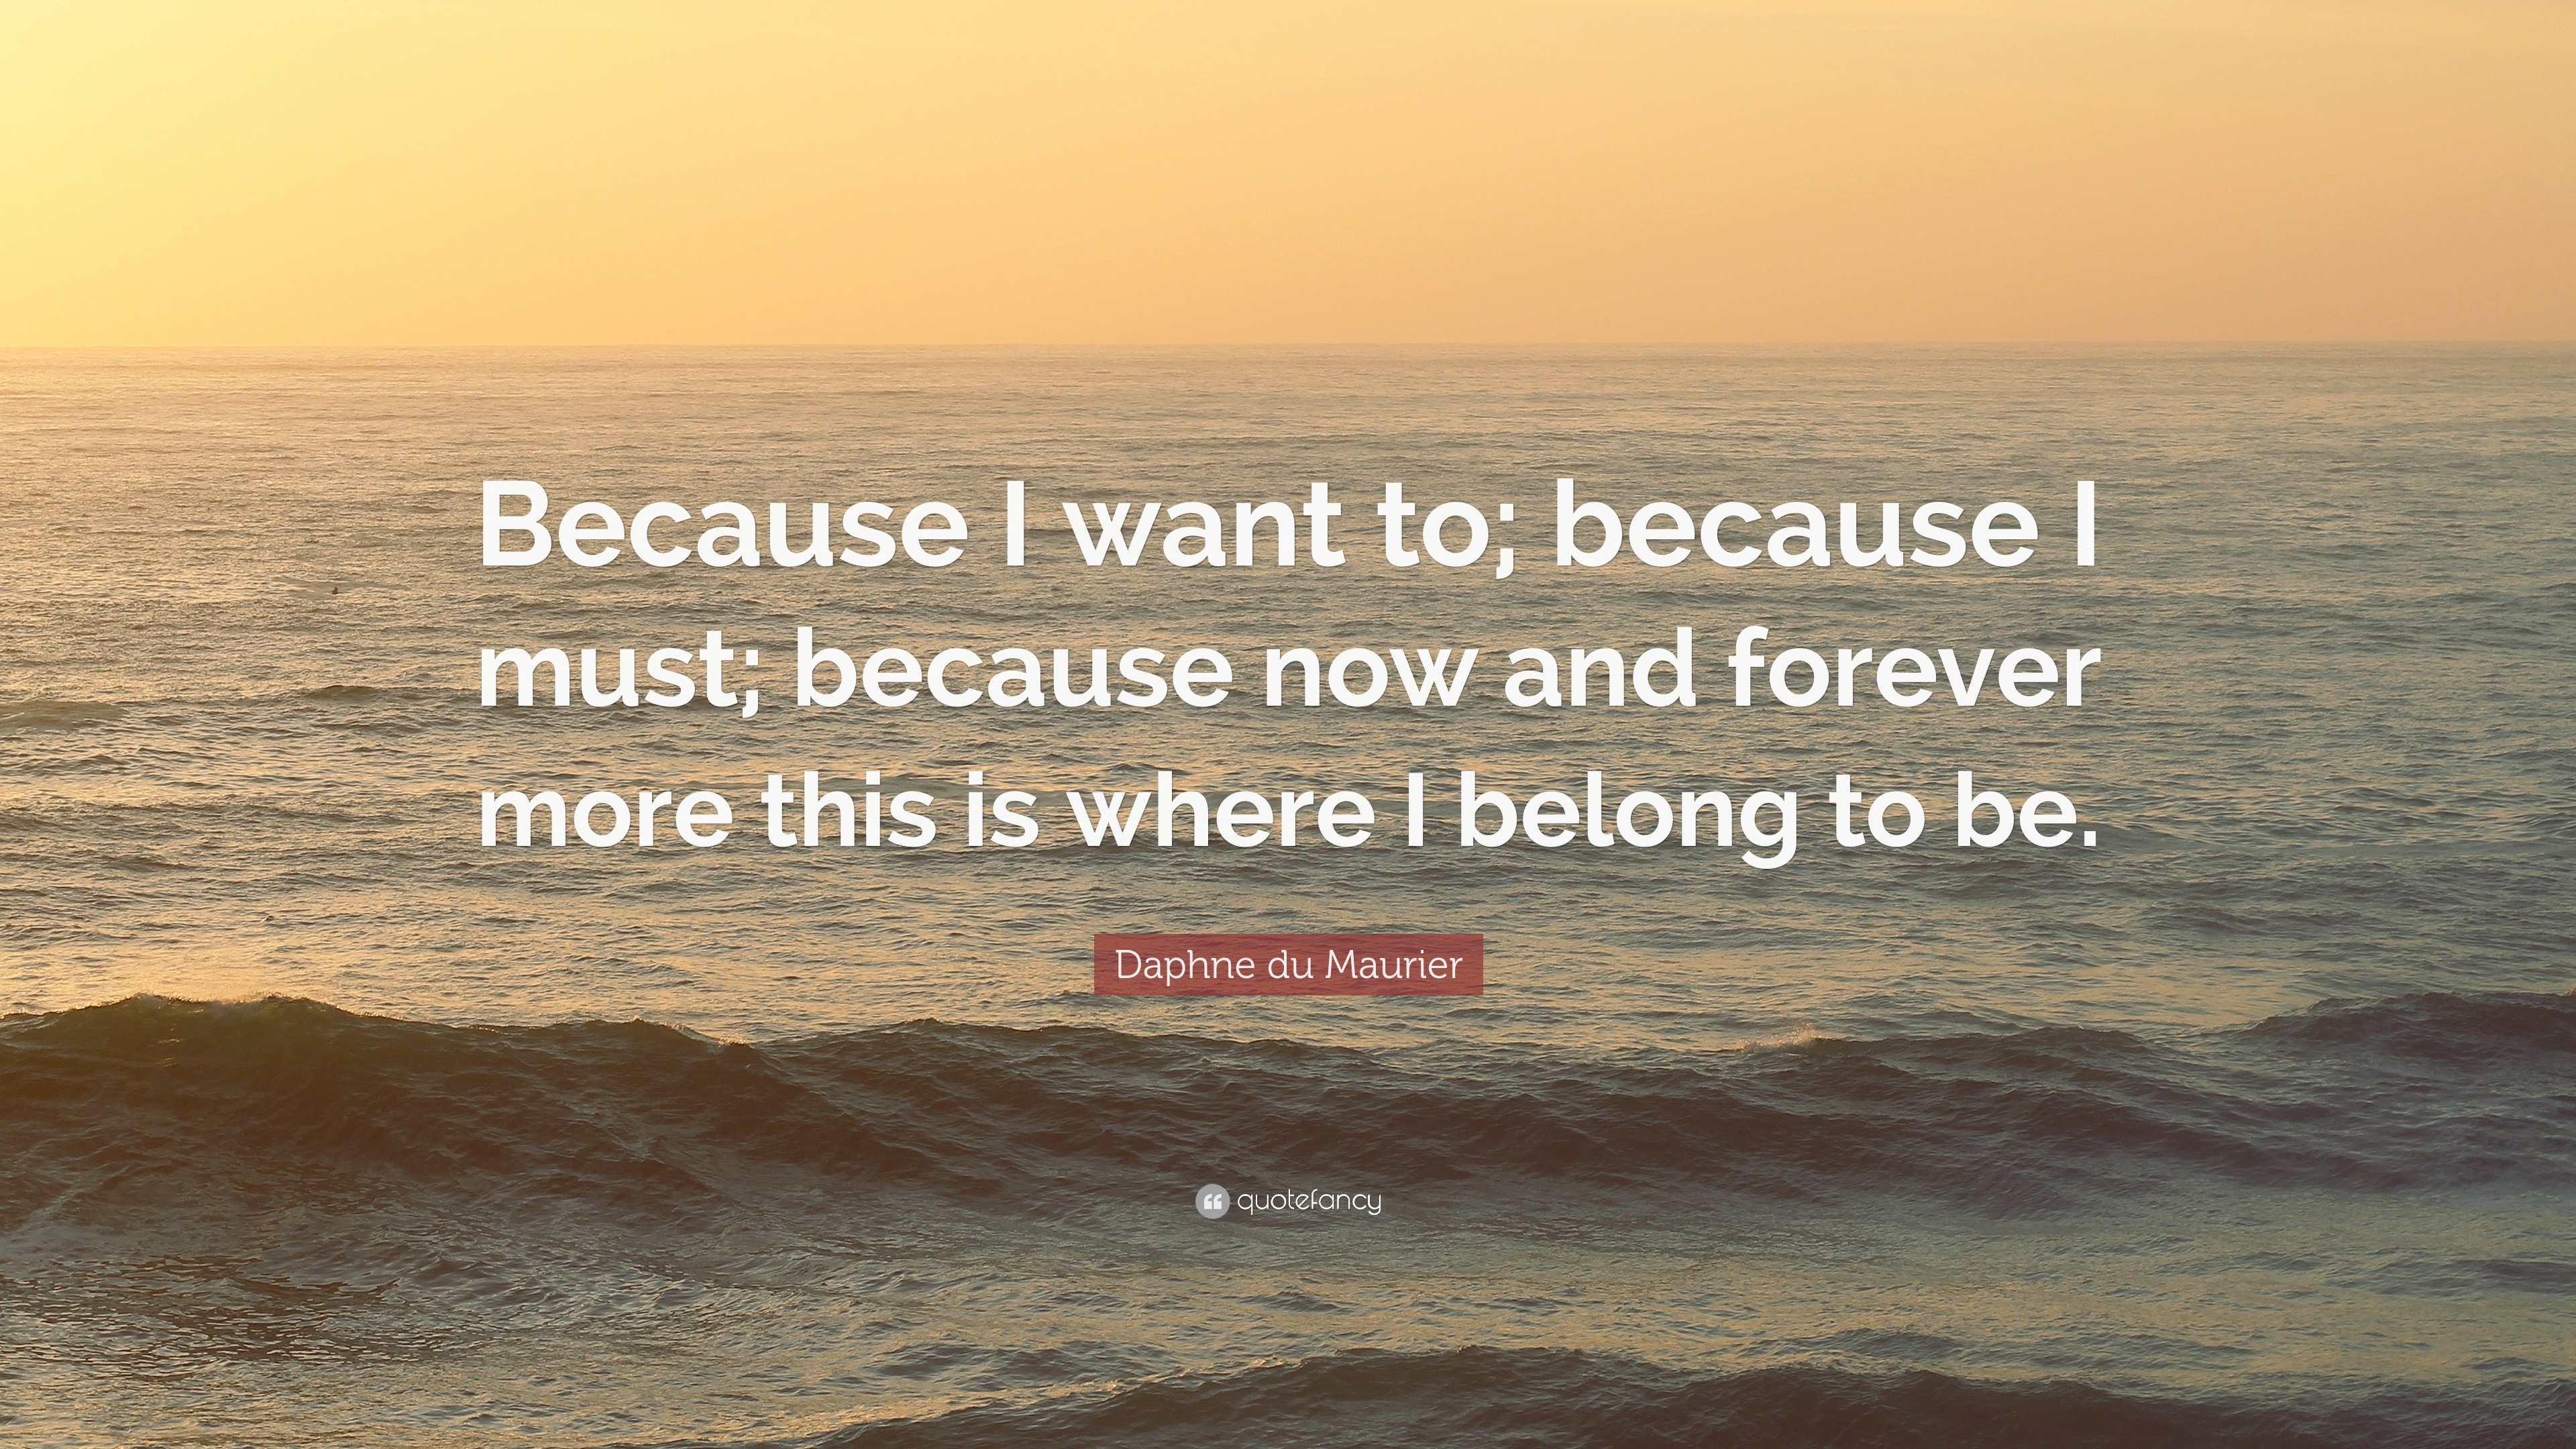 Daphne du Maurier Quote: “Because I want to; because I must; because